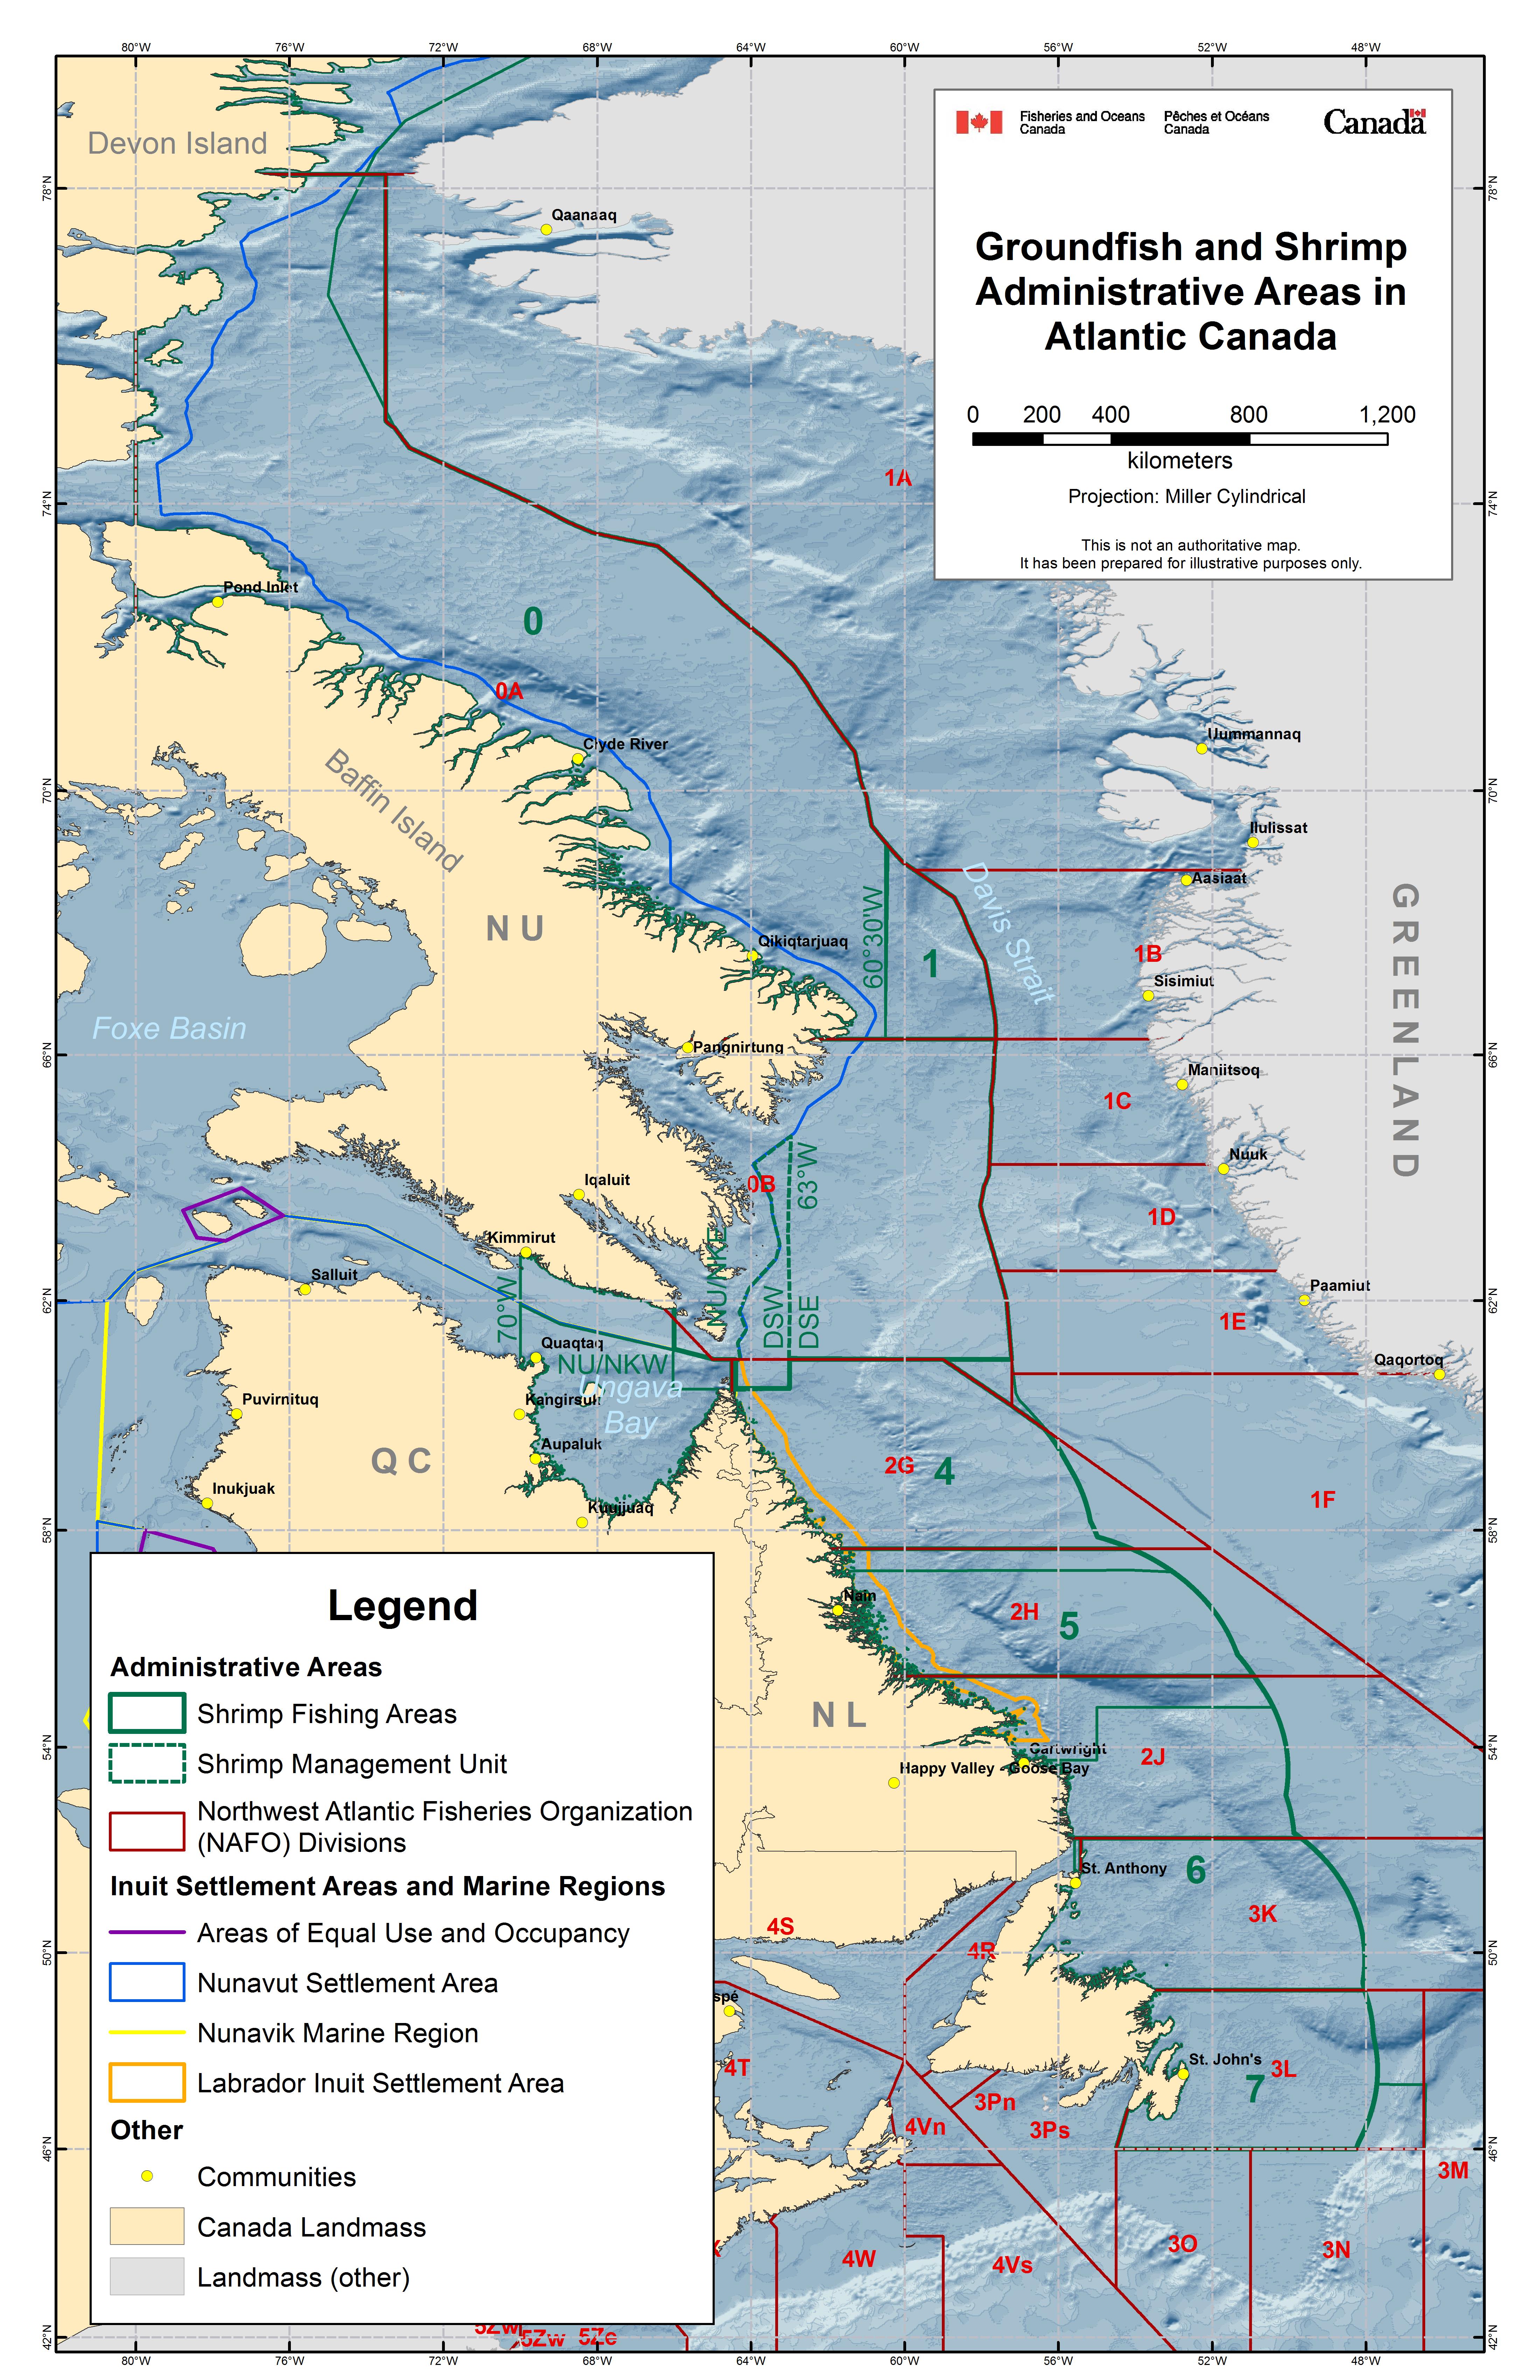 Map of groundfish and shrimp administrative areas in Atlantic Canada